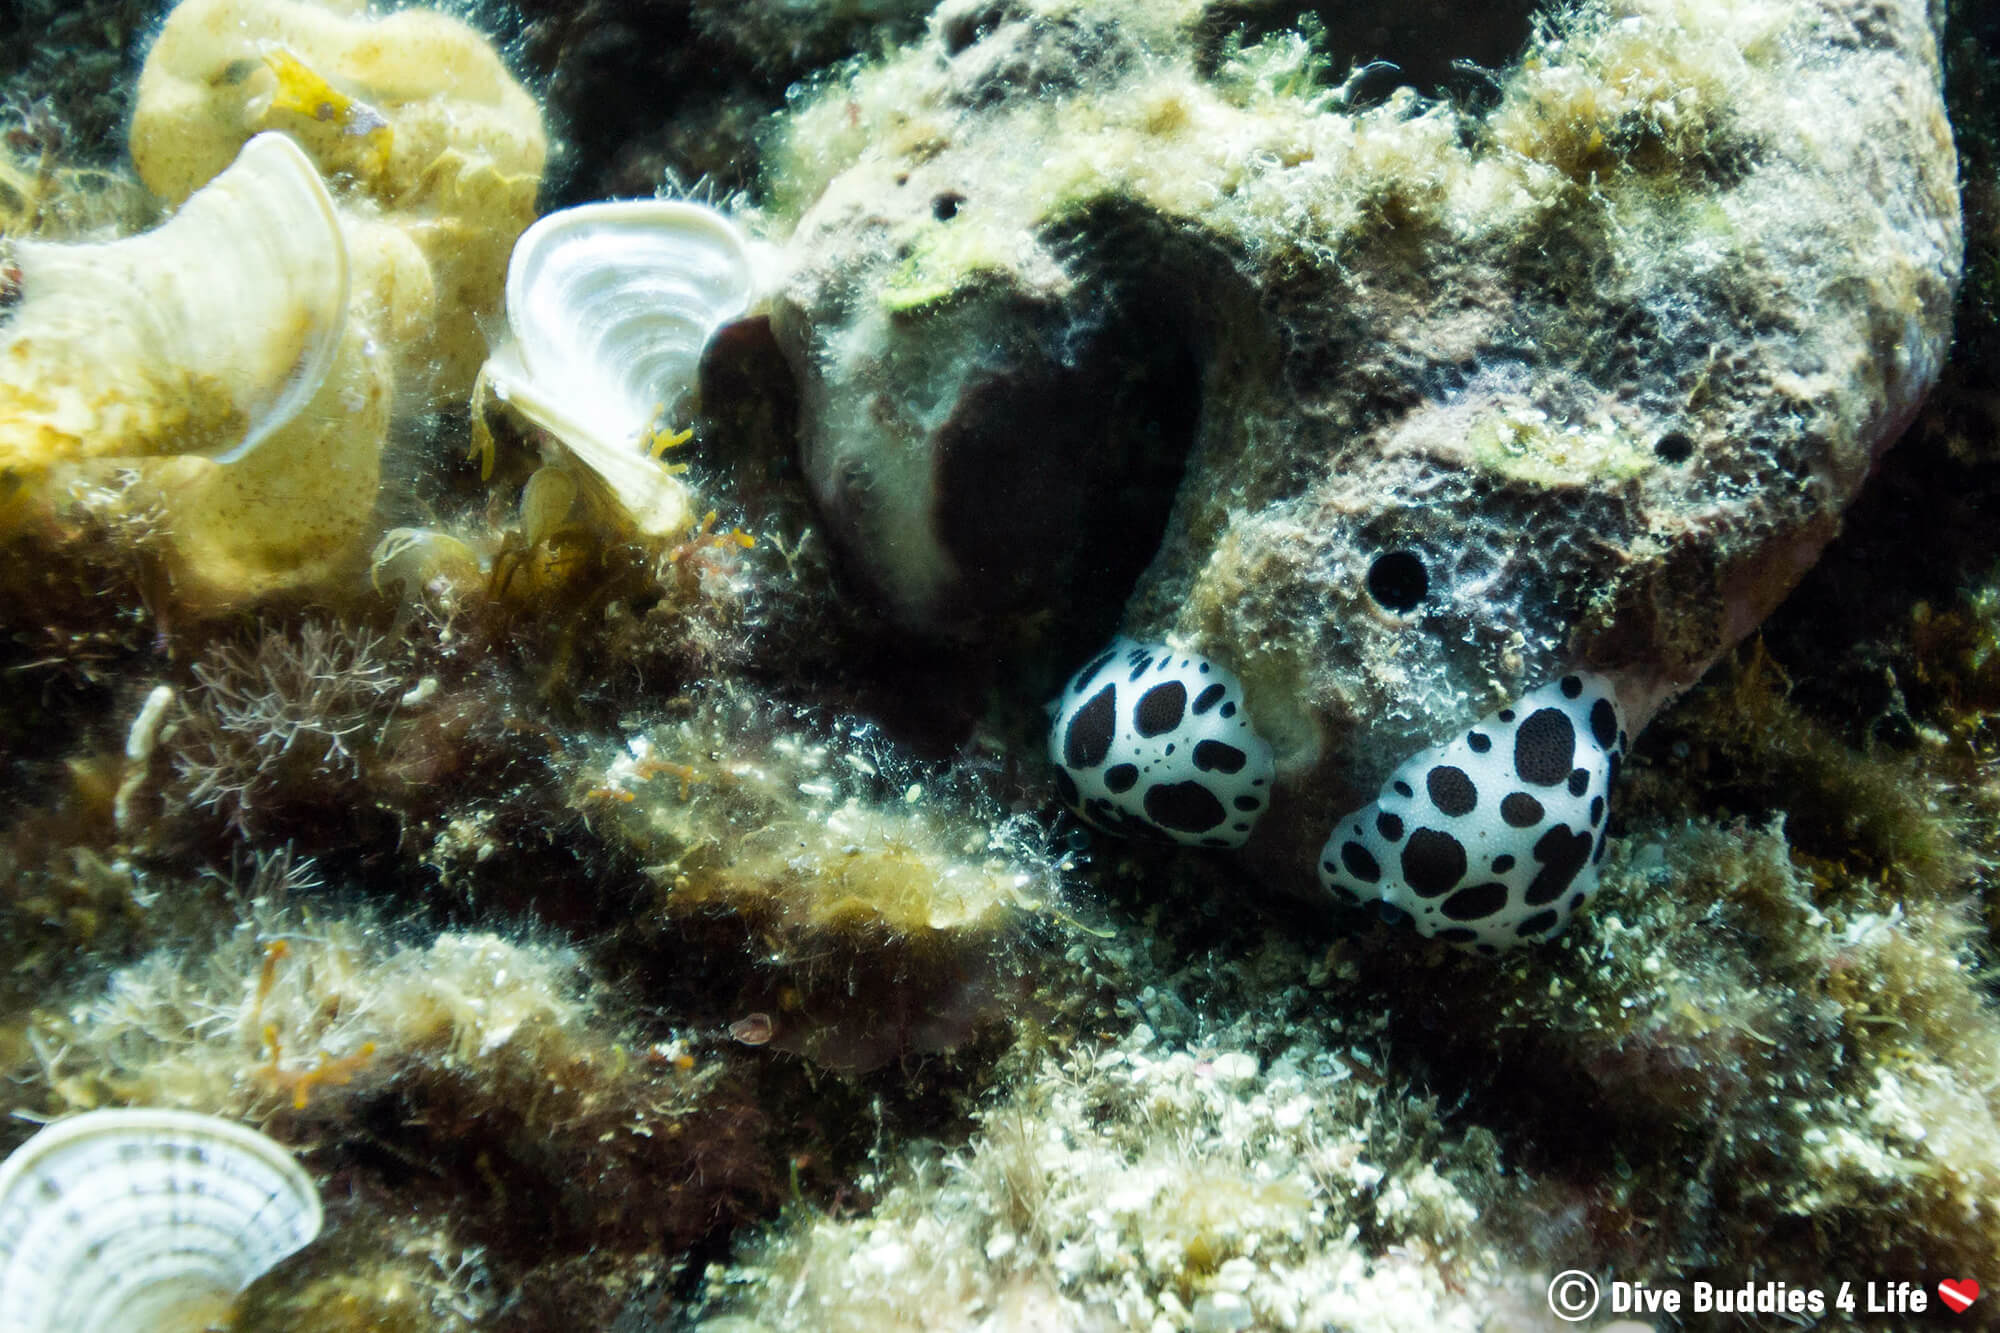 Two Black And White Spotted Nudibranchs In The Mediterranean Sea Of Dubrovnik, Croatia